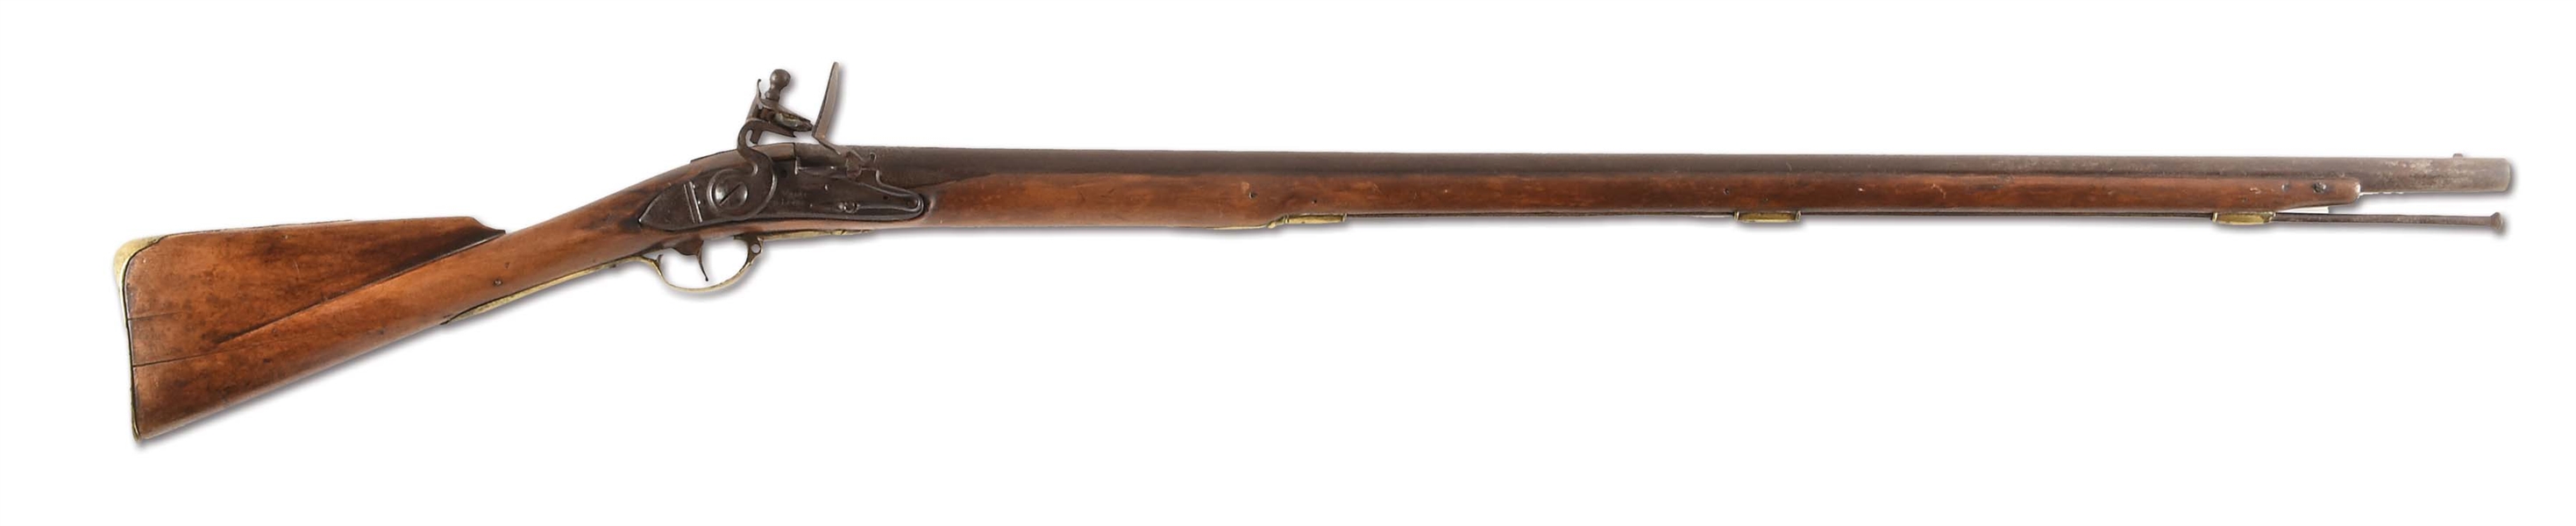 (A) AMERICAN FLINTLOCK MUSKET WITH EARLY UNITED STATES MARKINGS. 